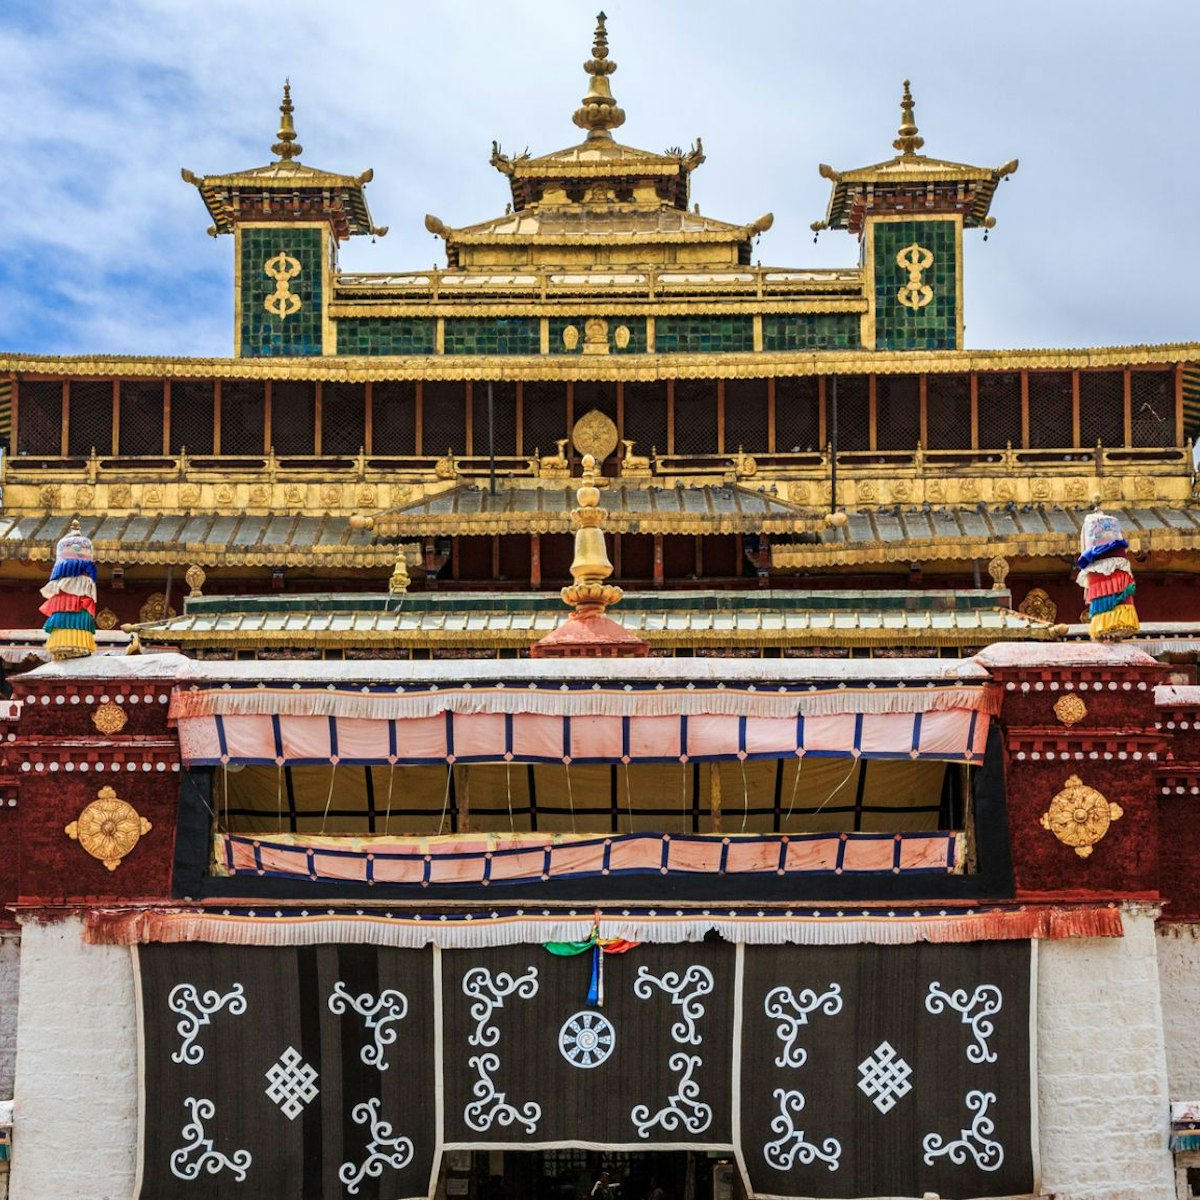 The main assembly hall of Samye Monastery in Dranang county, Shannan (Lhoka) Prefecture, Tibet, China. Samye Monastery (Samye Gompa) is the first buddhist monastery built in Tibet, established in 763 AD under the patronage of Tibetan king Trisong Detsen.